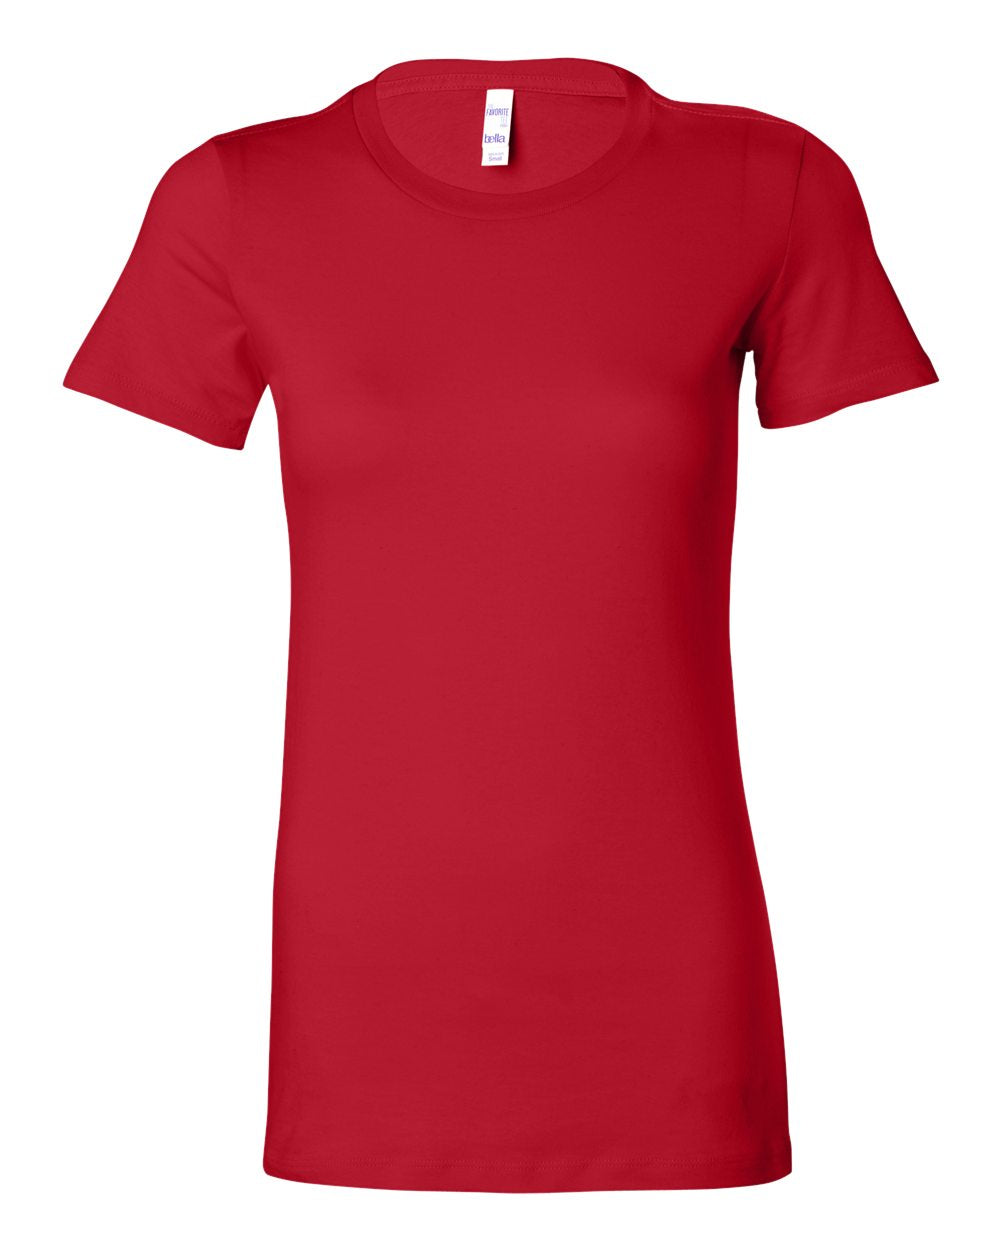 bella+canvas womens tee red